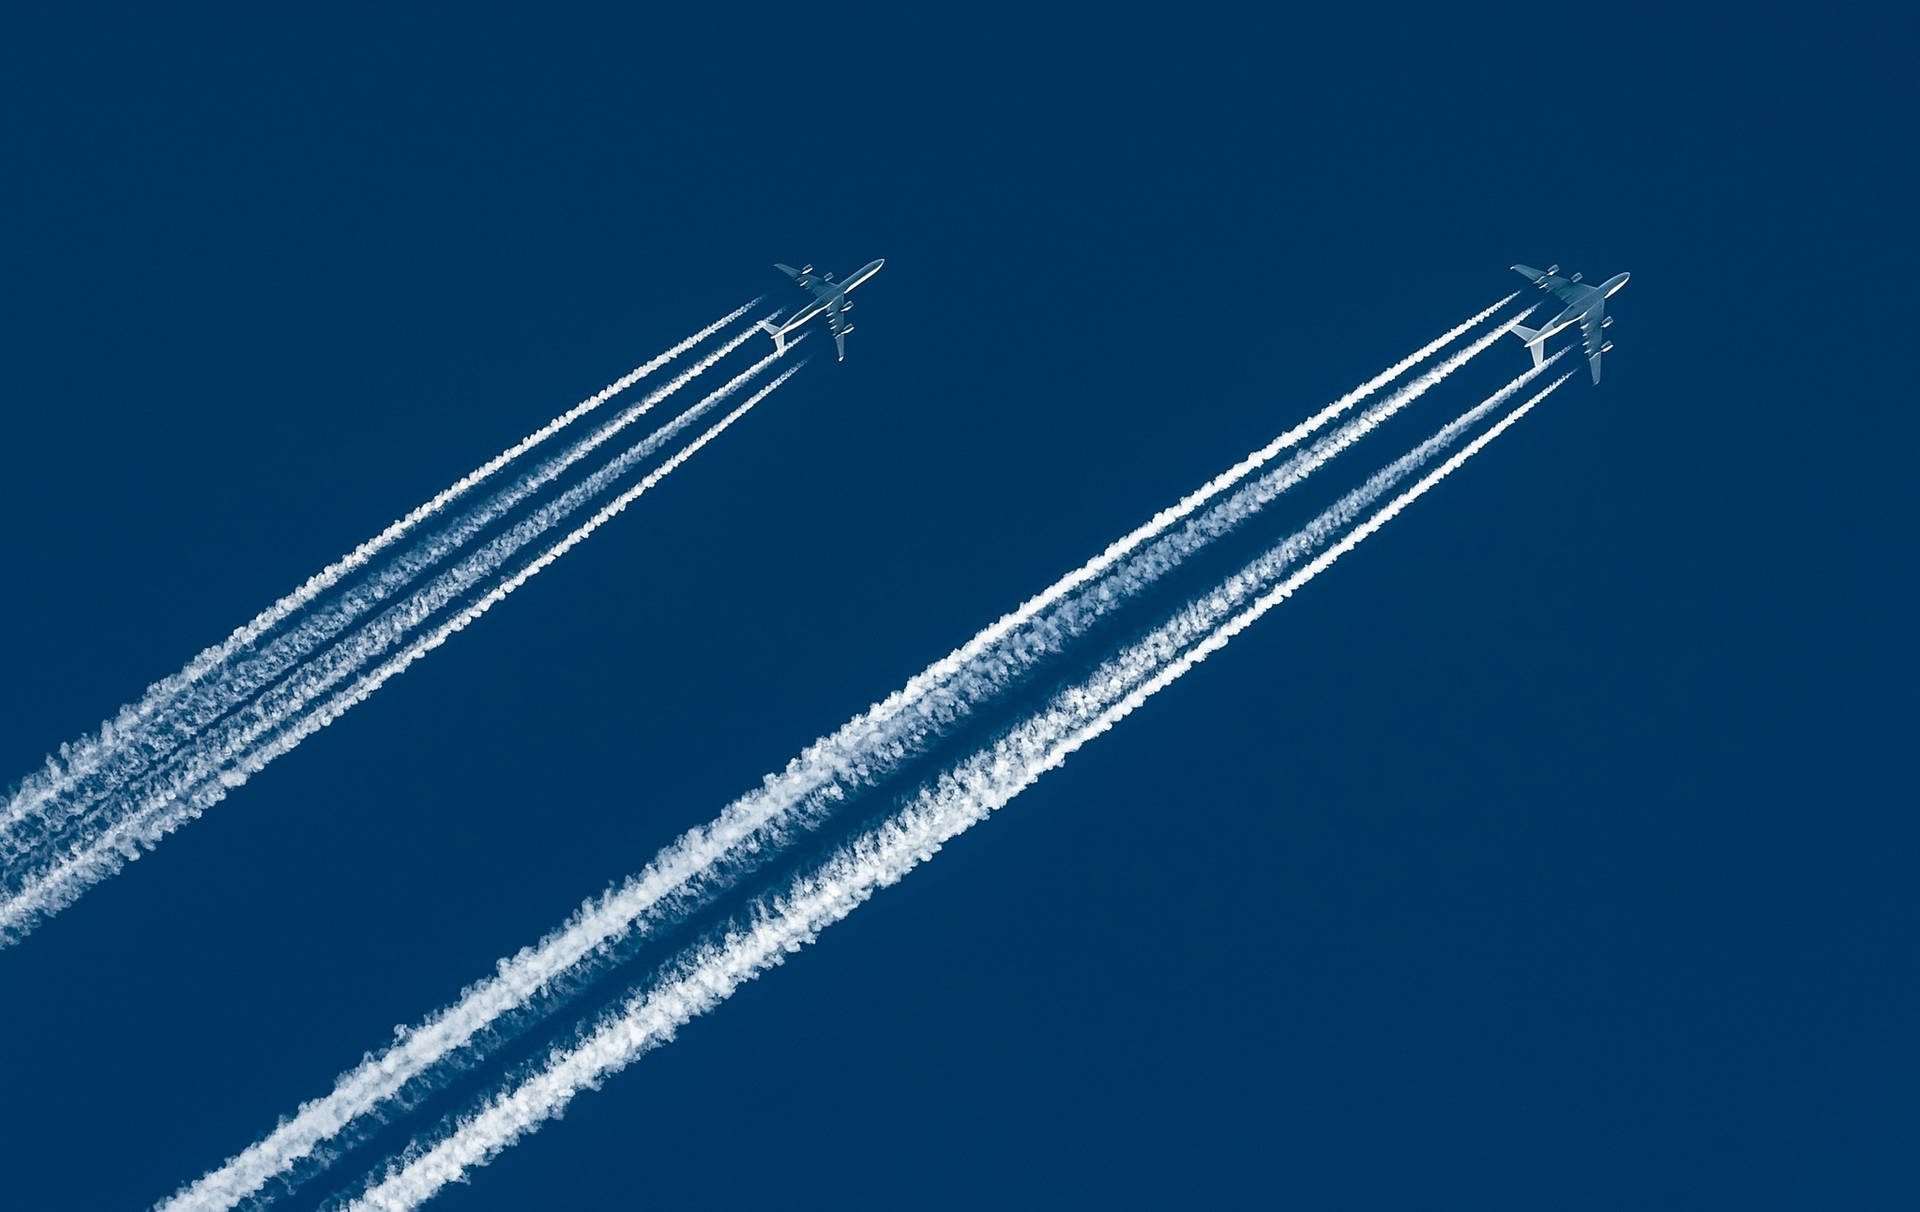 Two Hd Plane With Contrails